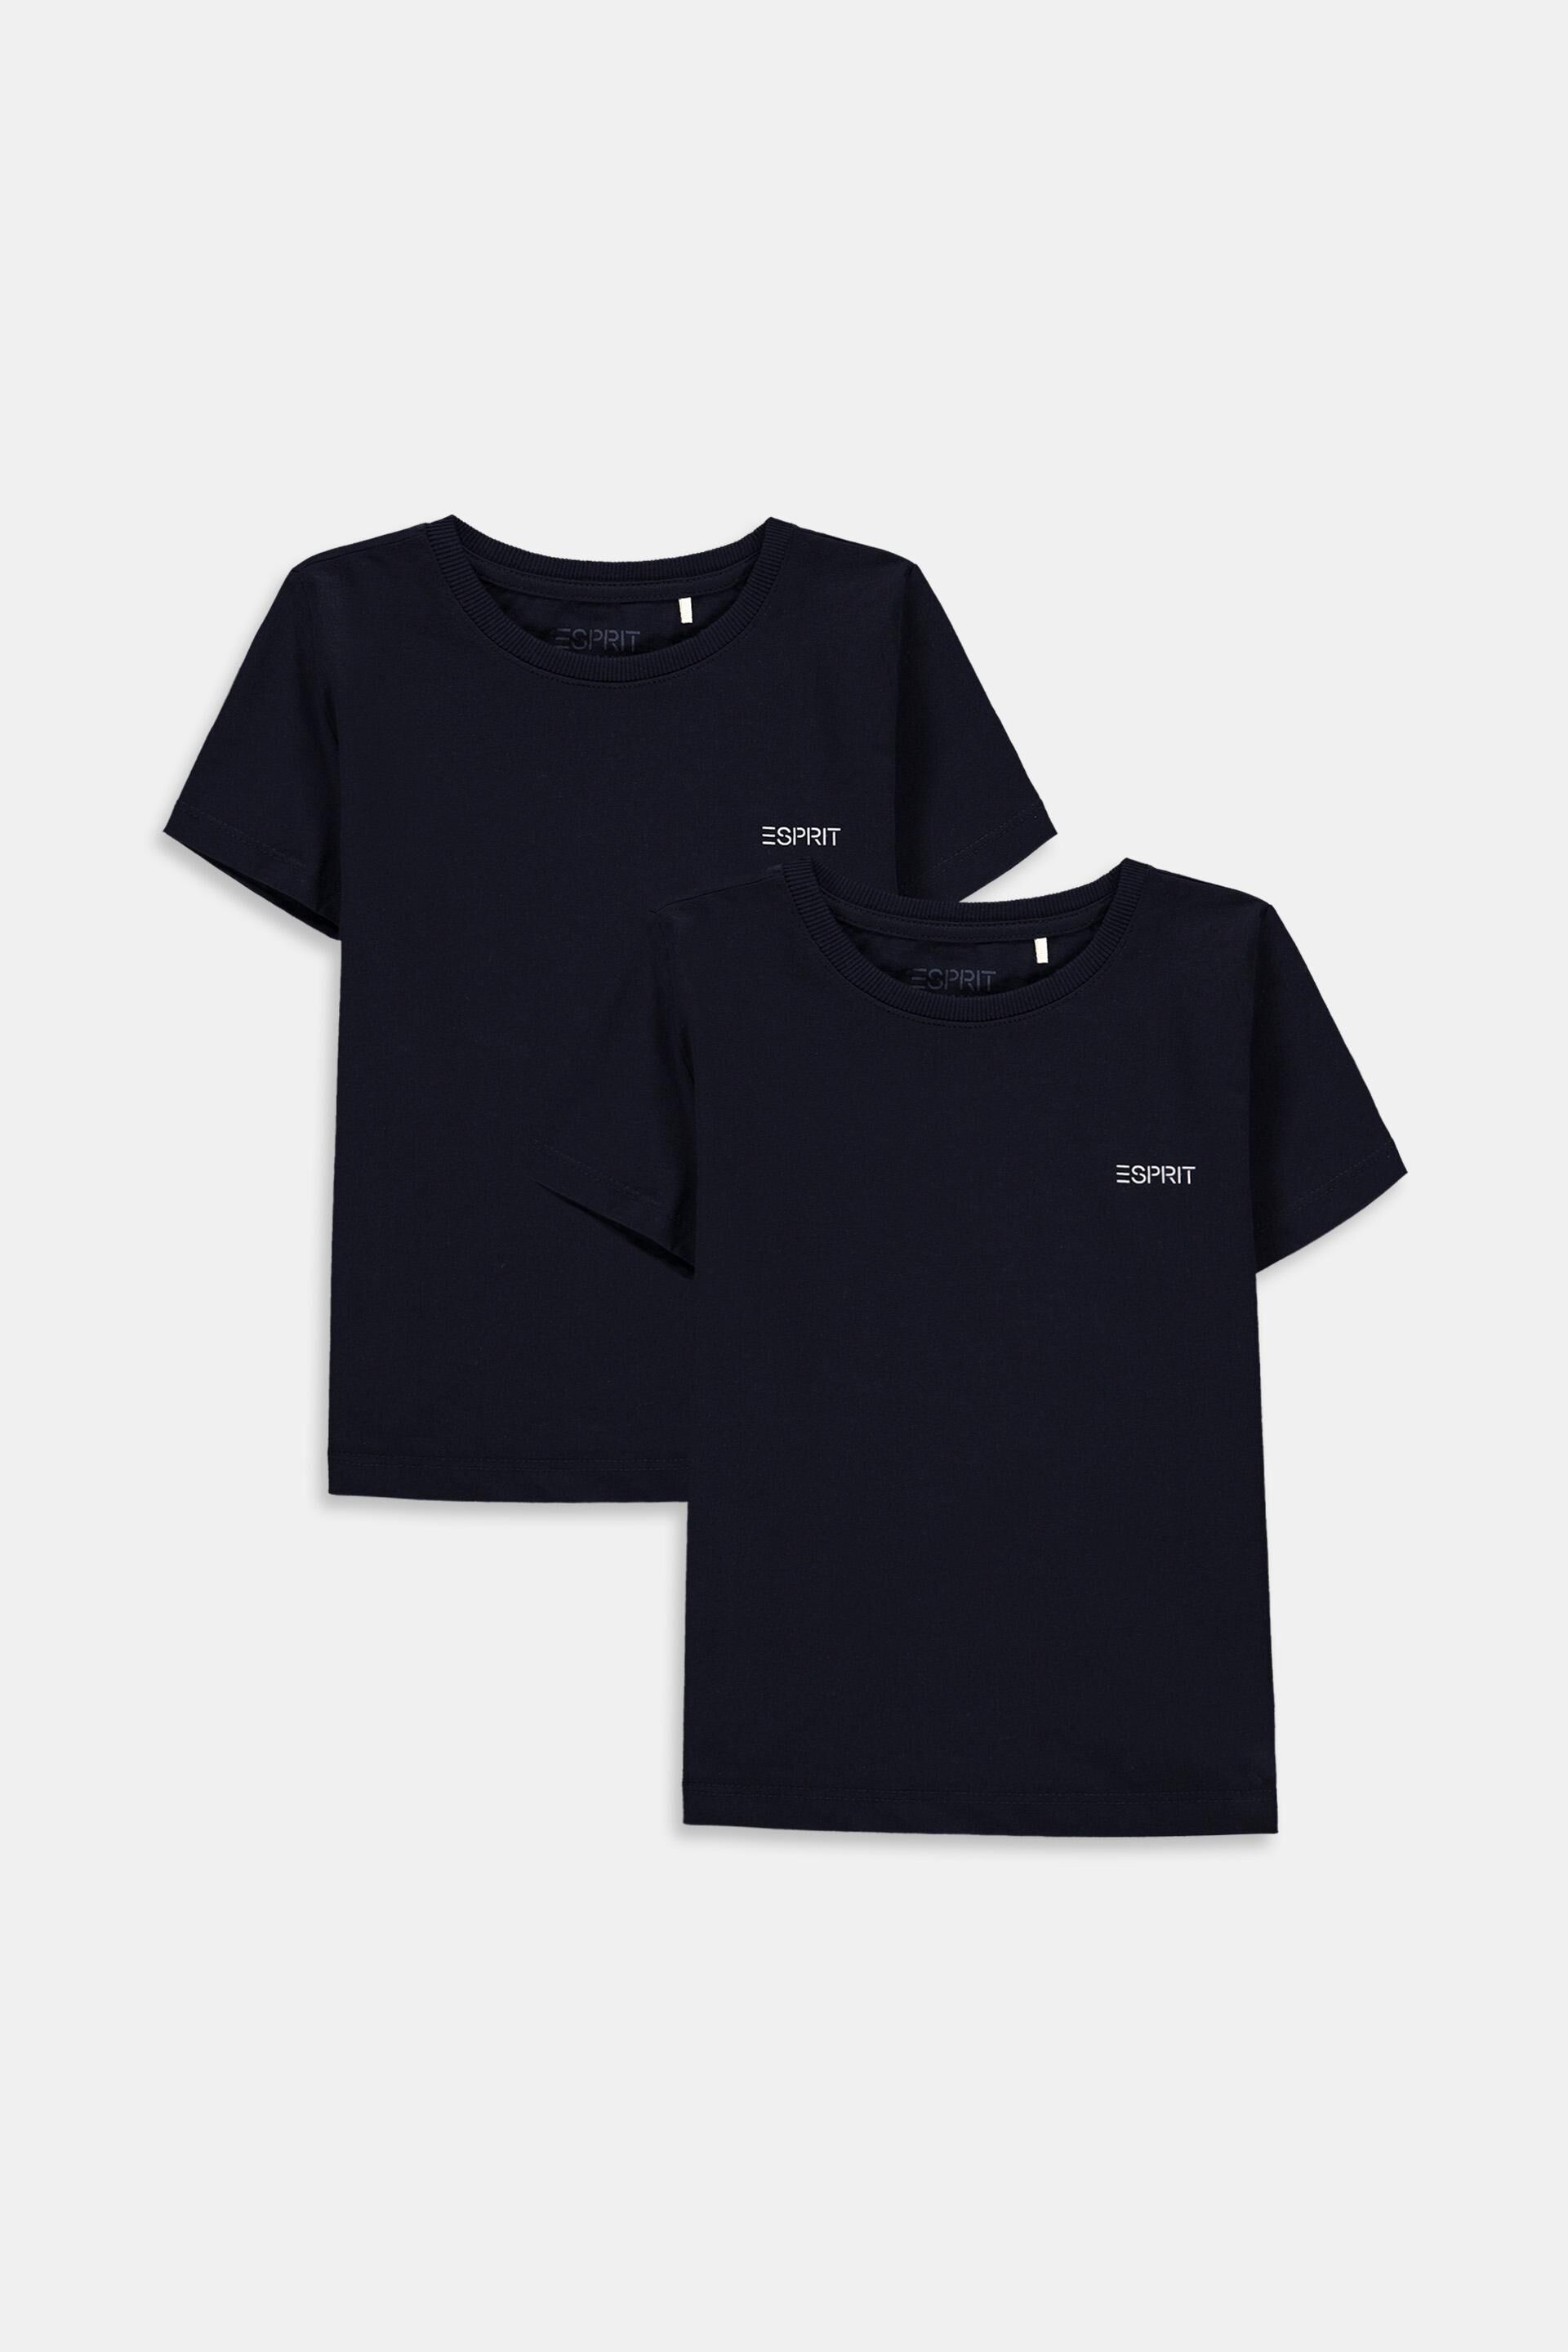 Esprit of T-shirts Double pack 100% made cotton